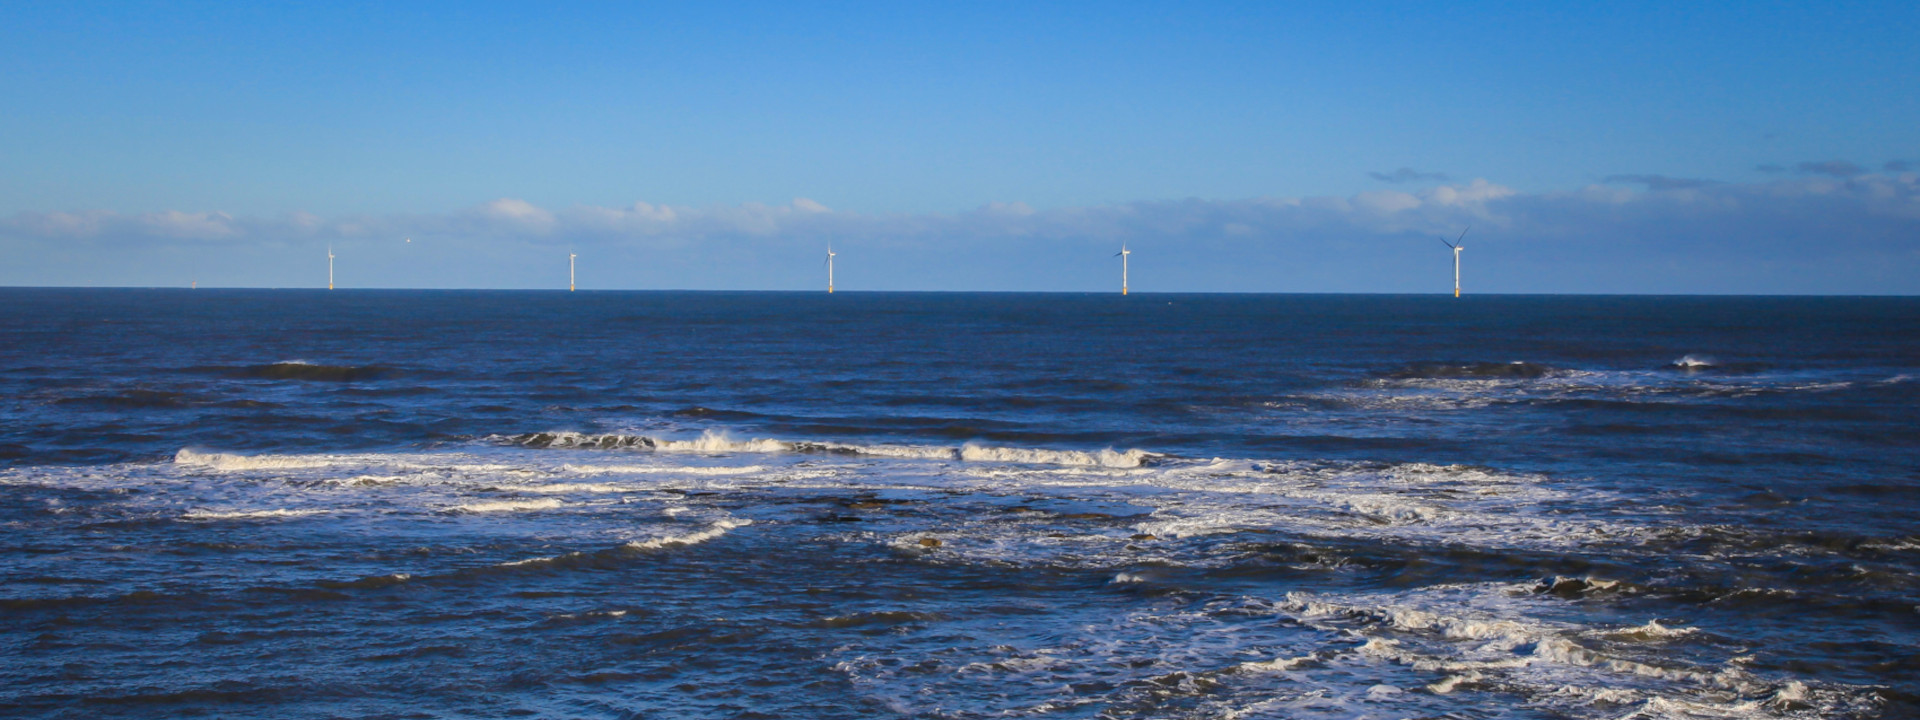 5 offshore wind turbines, the sea is breaking against an unseen shore